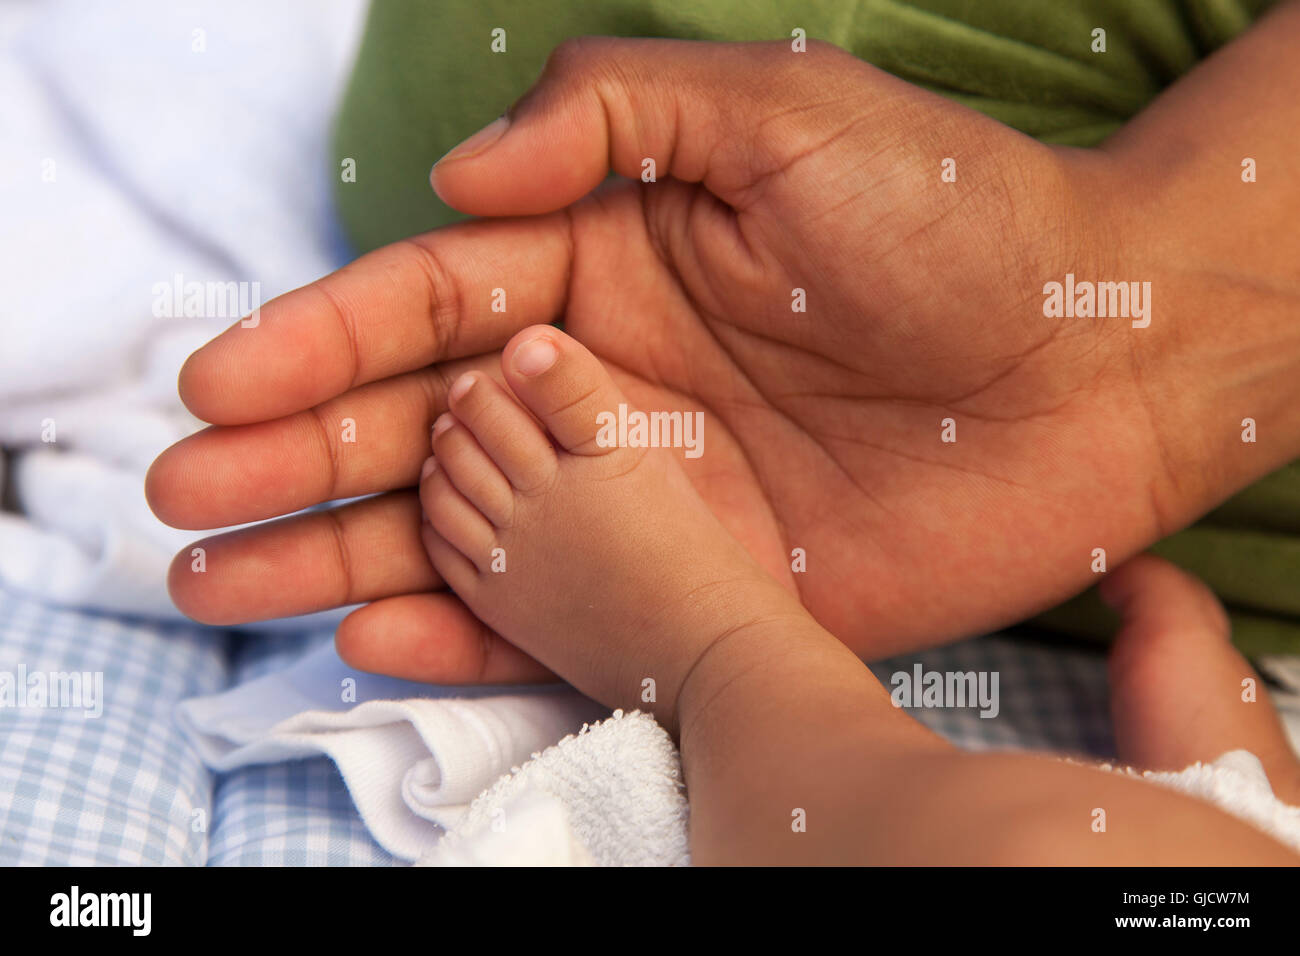 mother and baby, young family, protecting, warm colouring Stock Photo